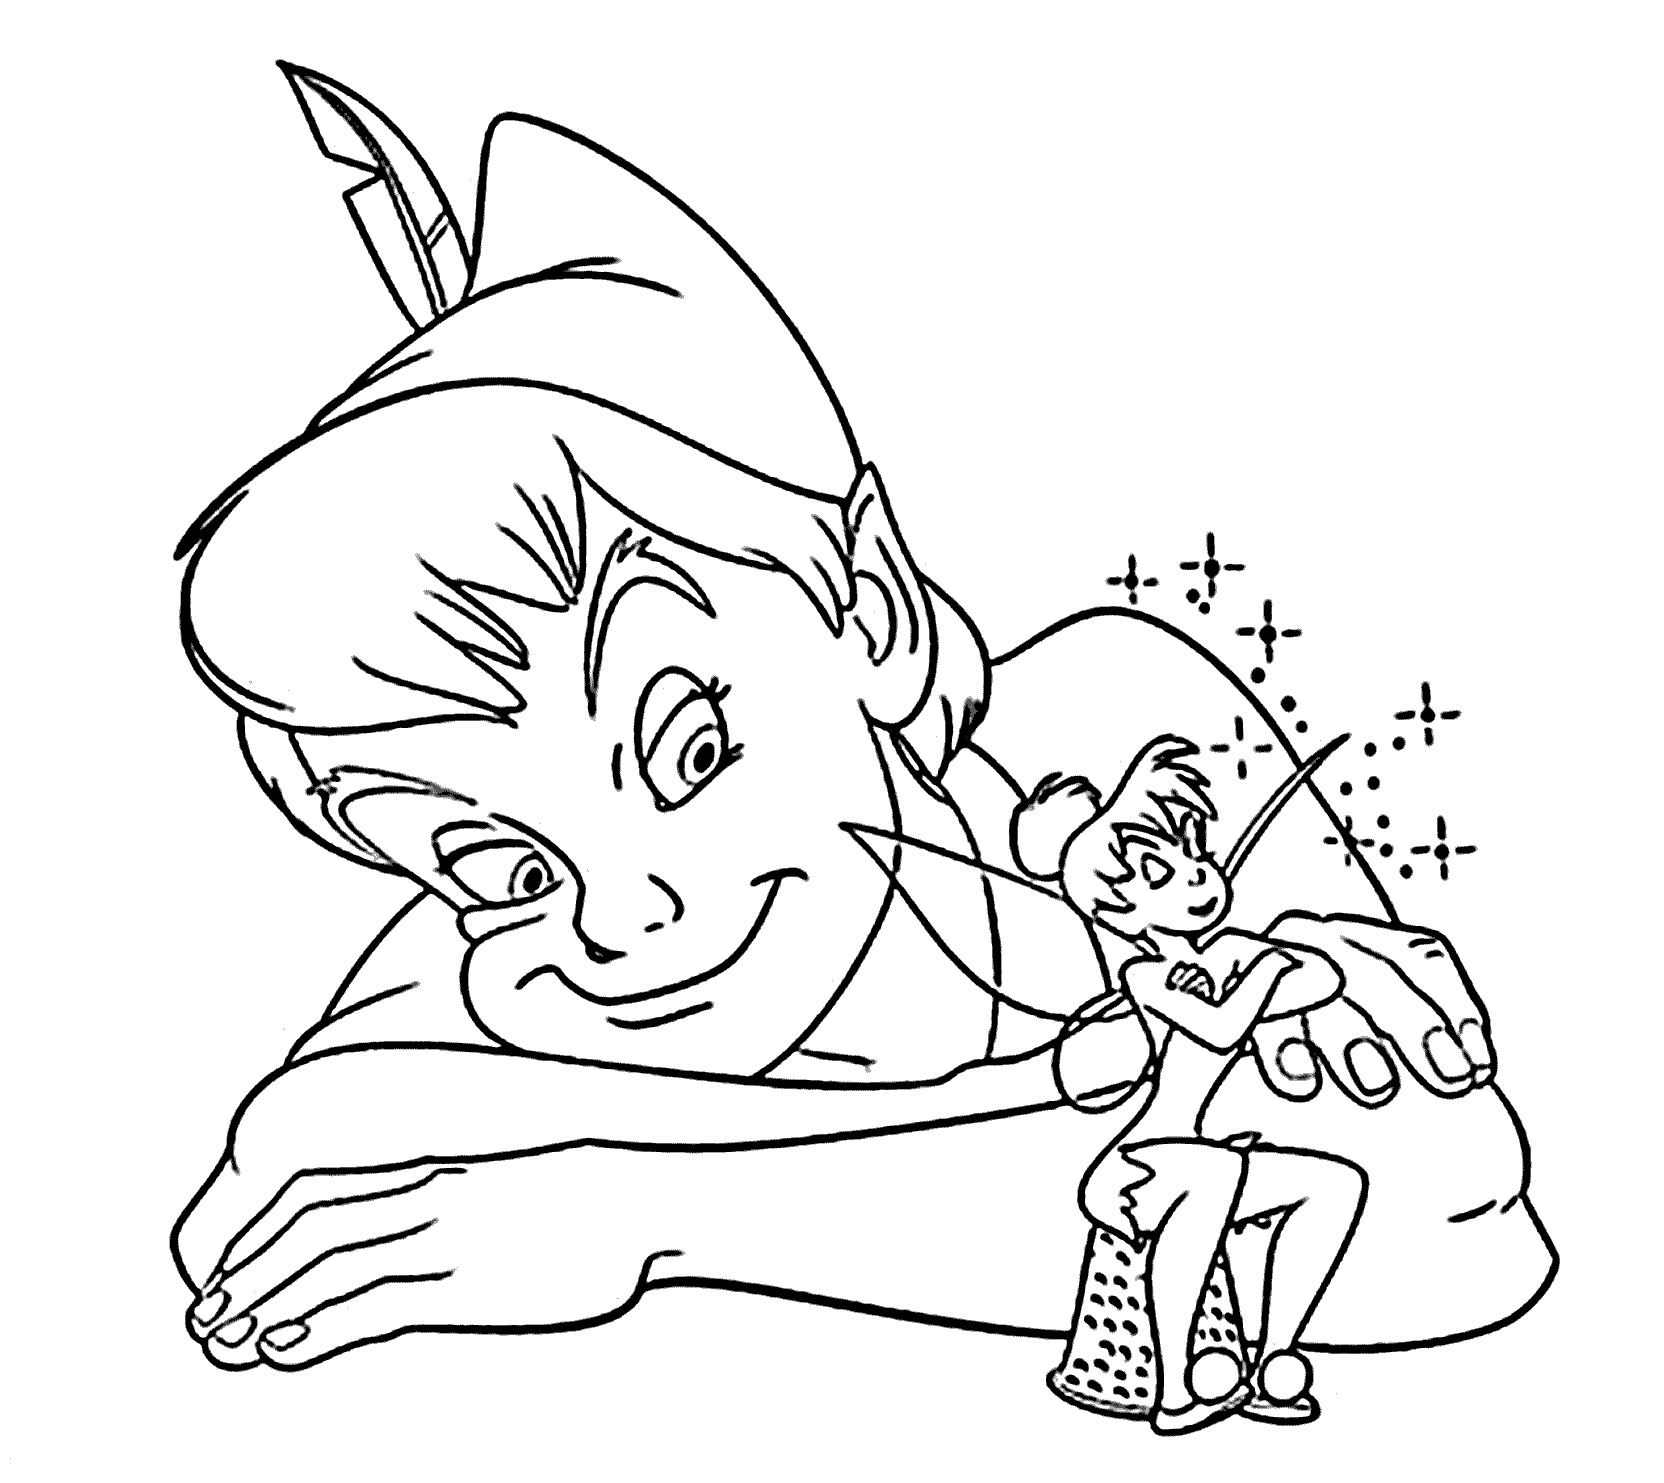 Coloring Pages : Coloring Pages Free Disney For Kids Printable World - Free Printable Disney Coloring Pages